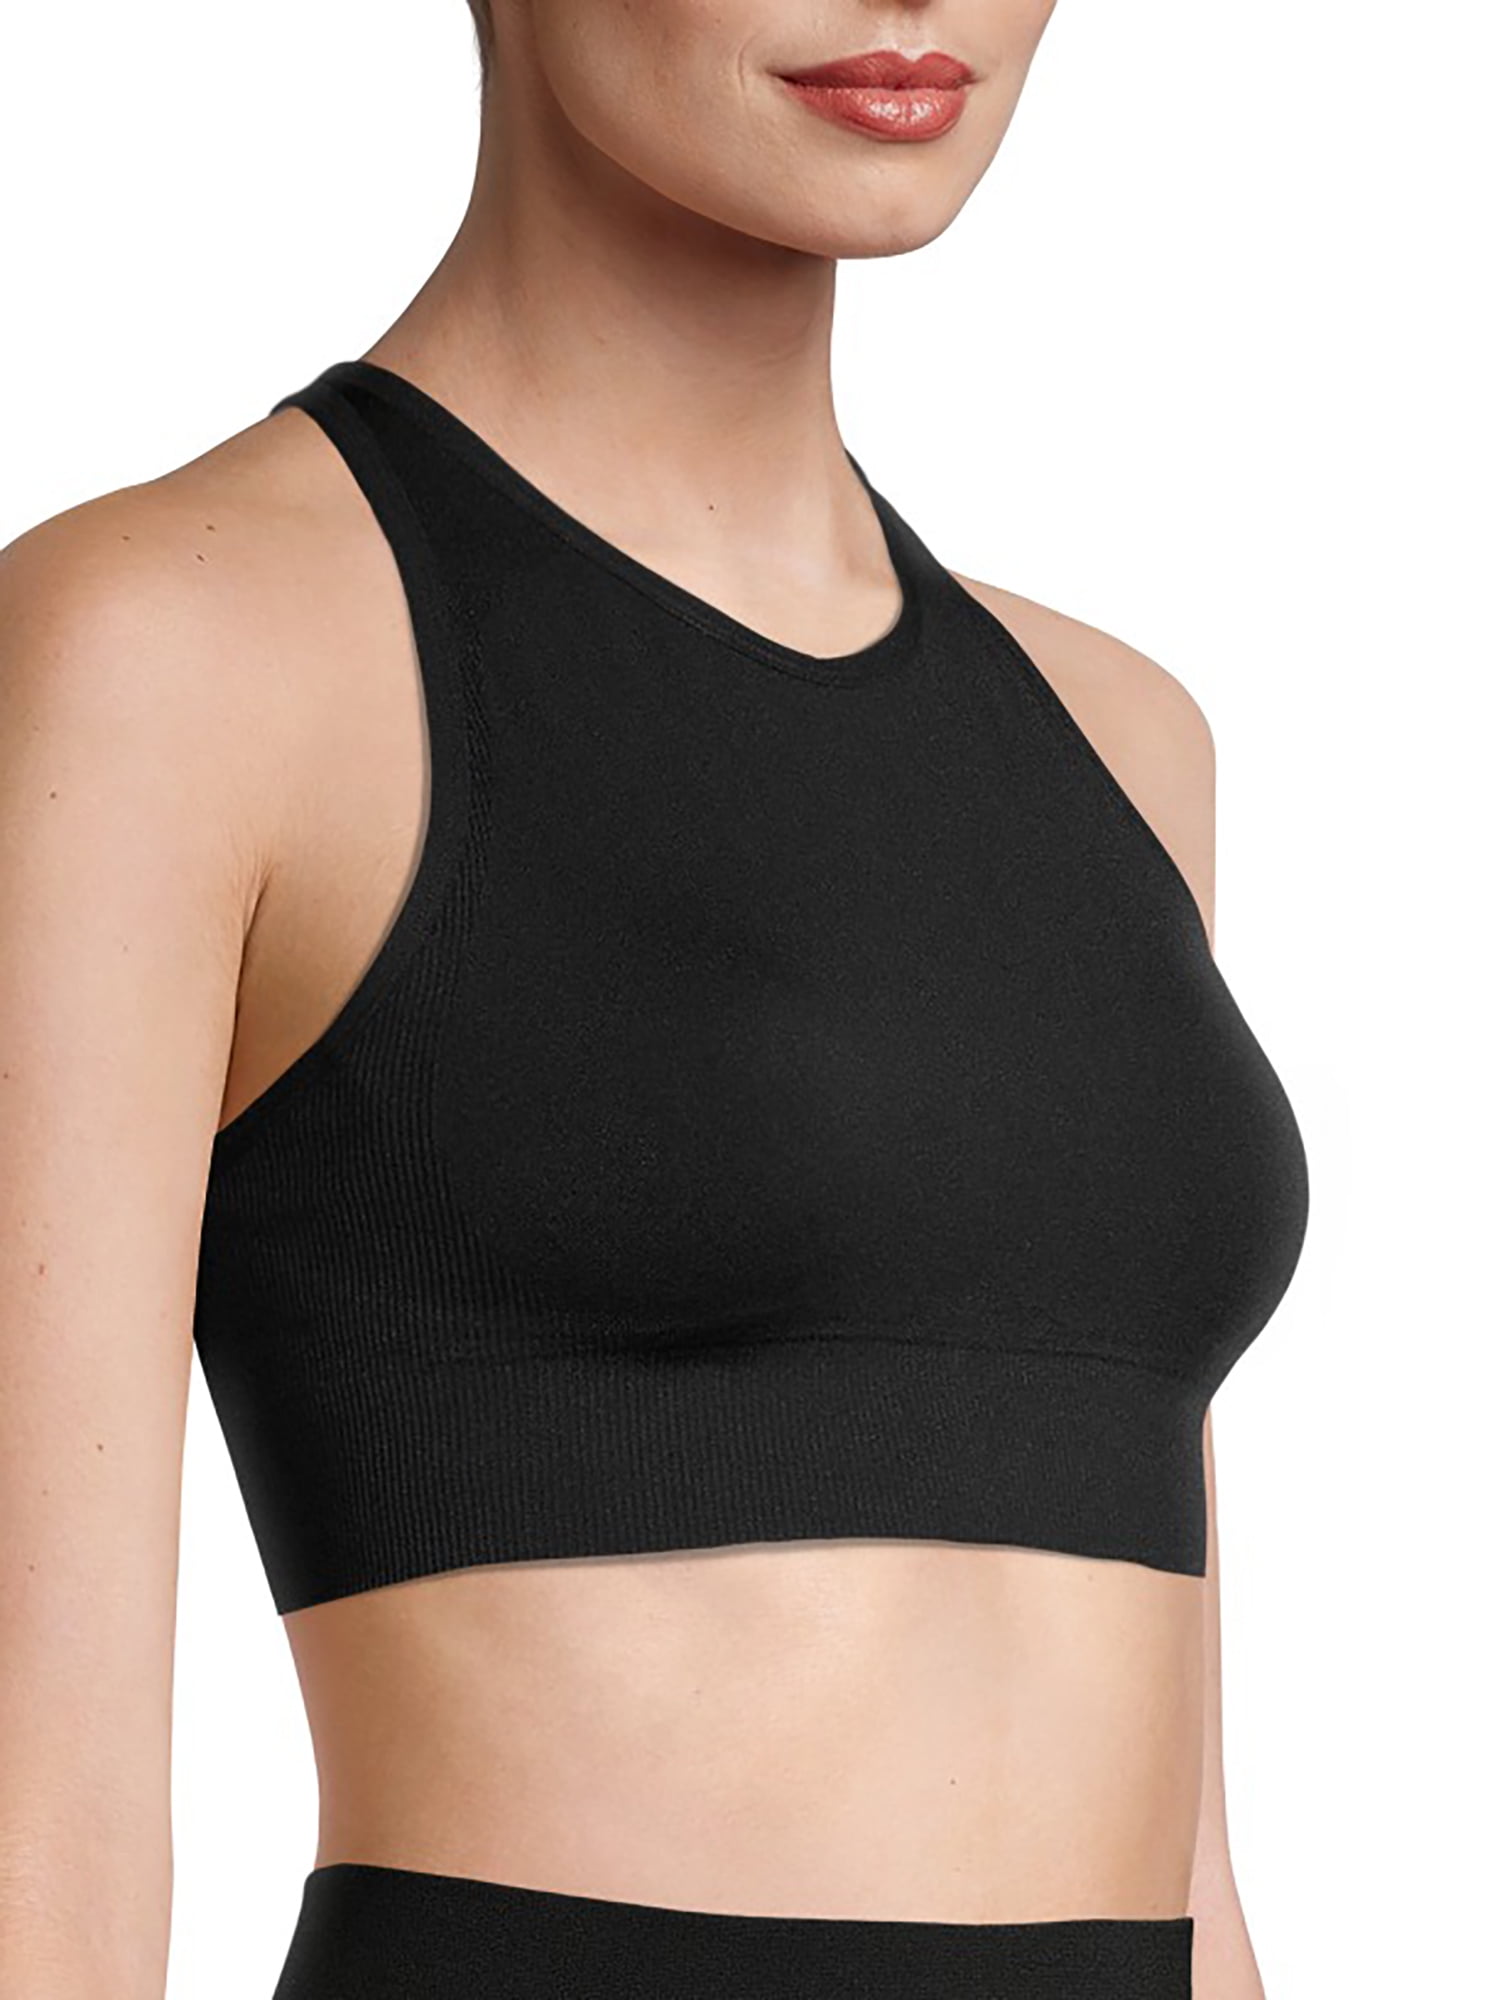 AMRIY Racerback Sports Bras for Women Medium Support Padded Bra Supportive  Compression Seamless Women's Sports Wireless Bra Black,S at  Women's  Clothing store